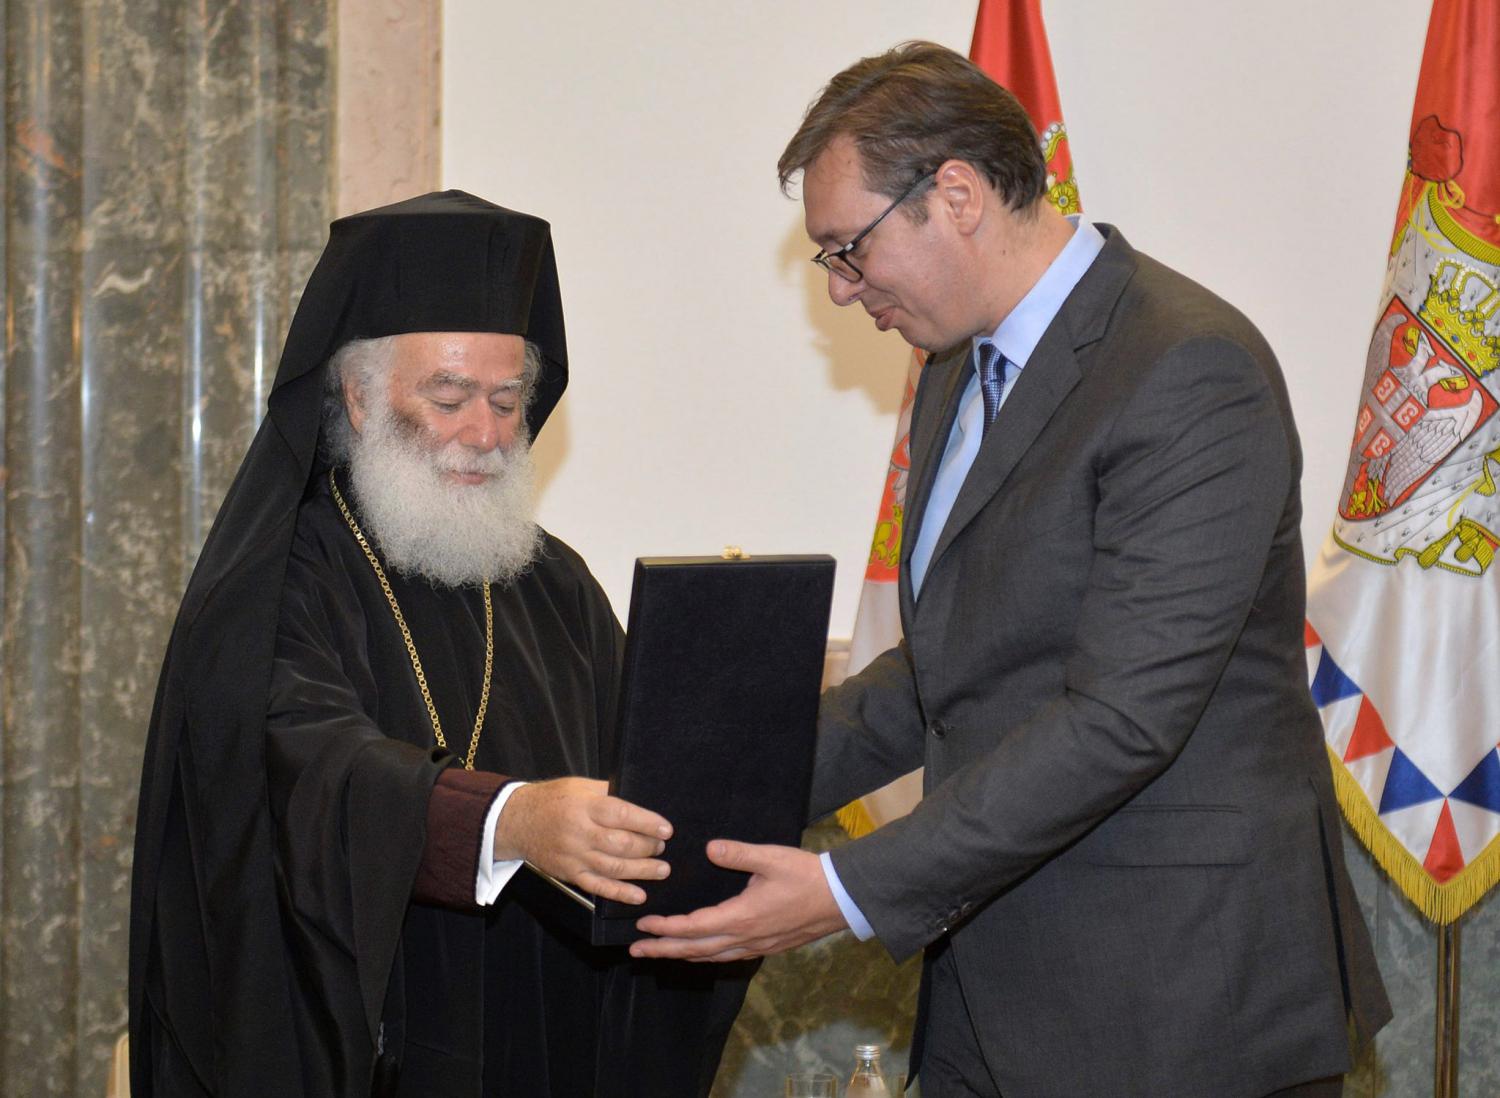 Alexandrian Patriarch Theodoros II awarded President of Serbia Aleksandar Vucic with the order of Great Cross of Apostle Mark – A high state order handed in to Patriarch Theodoros II